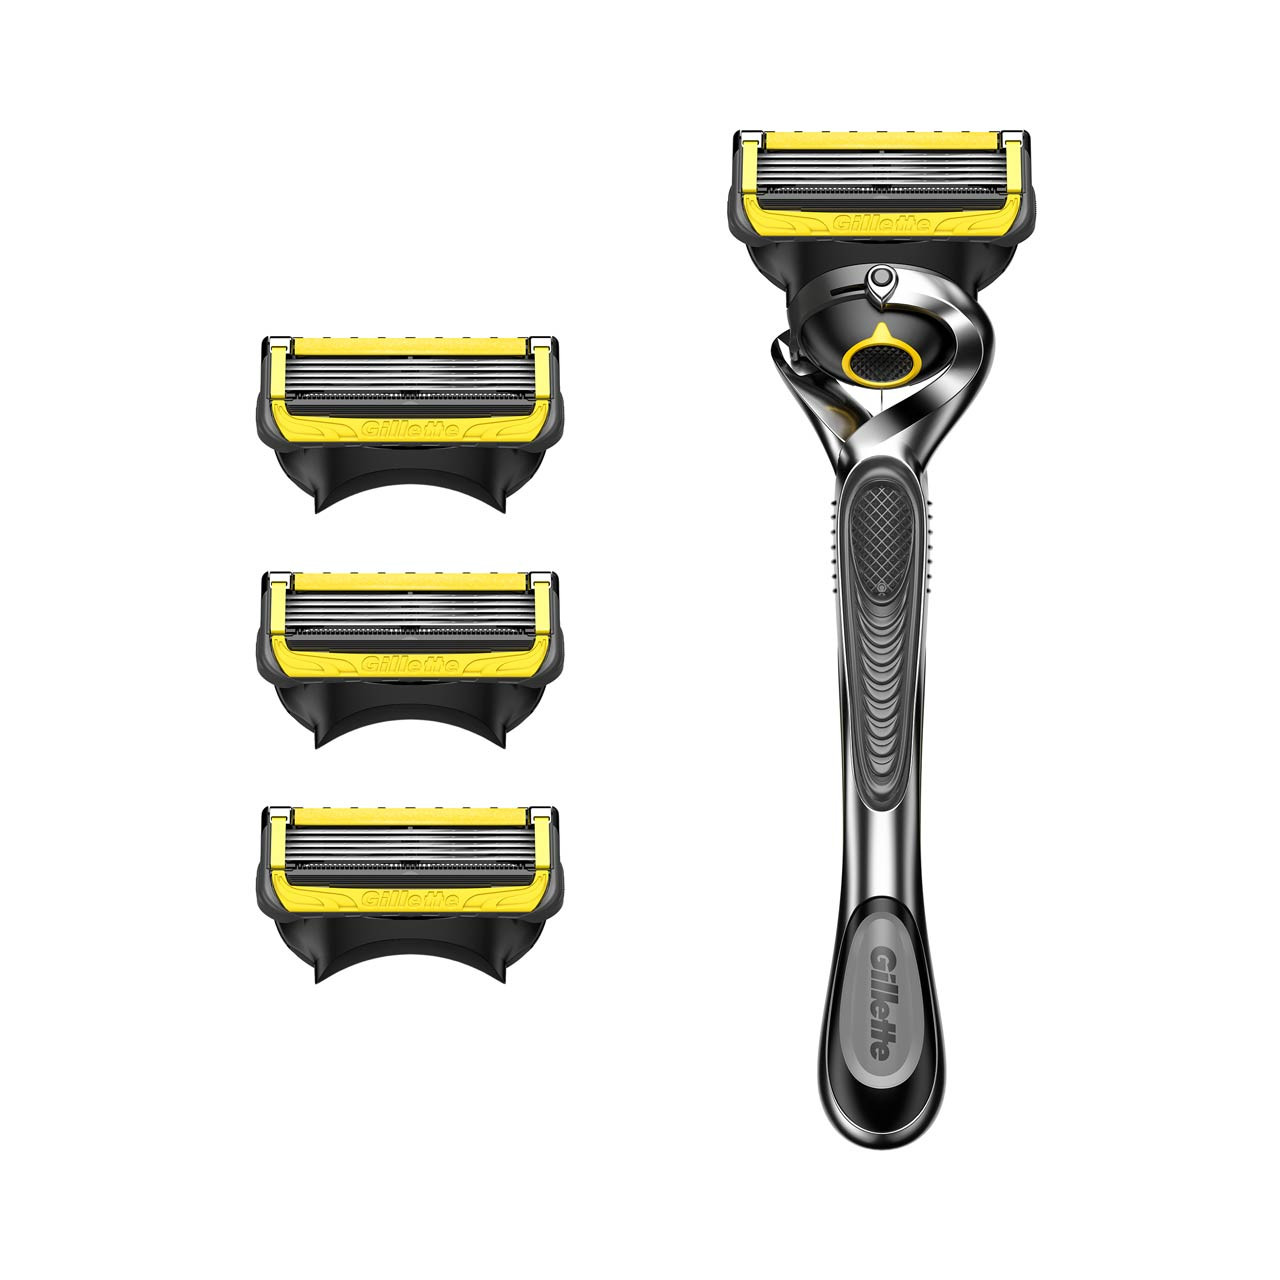 Gillette, Fusion5 Proshield Razor with Blades Refill 4 Pack